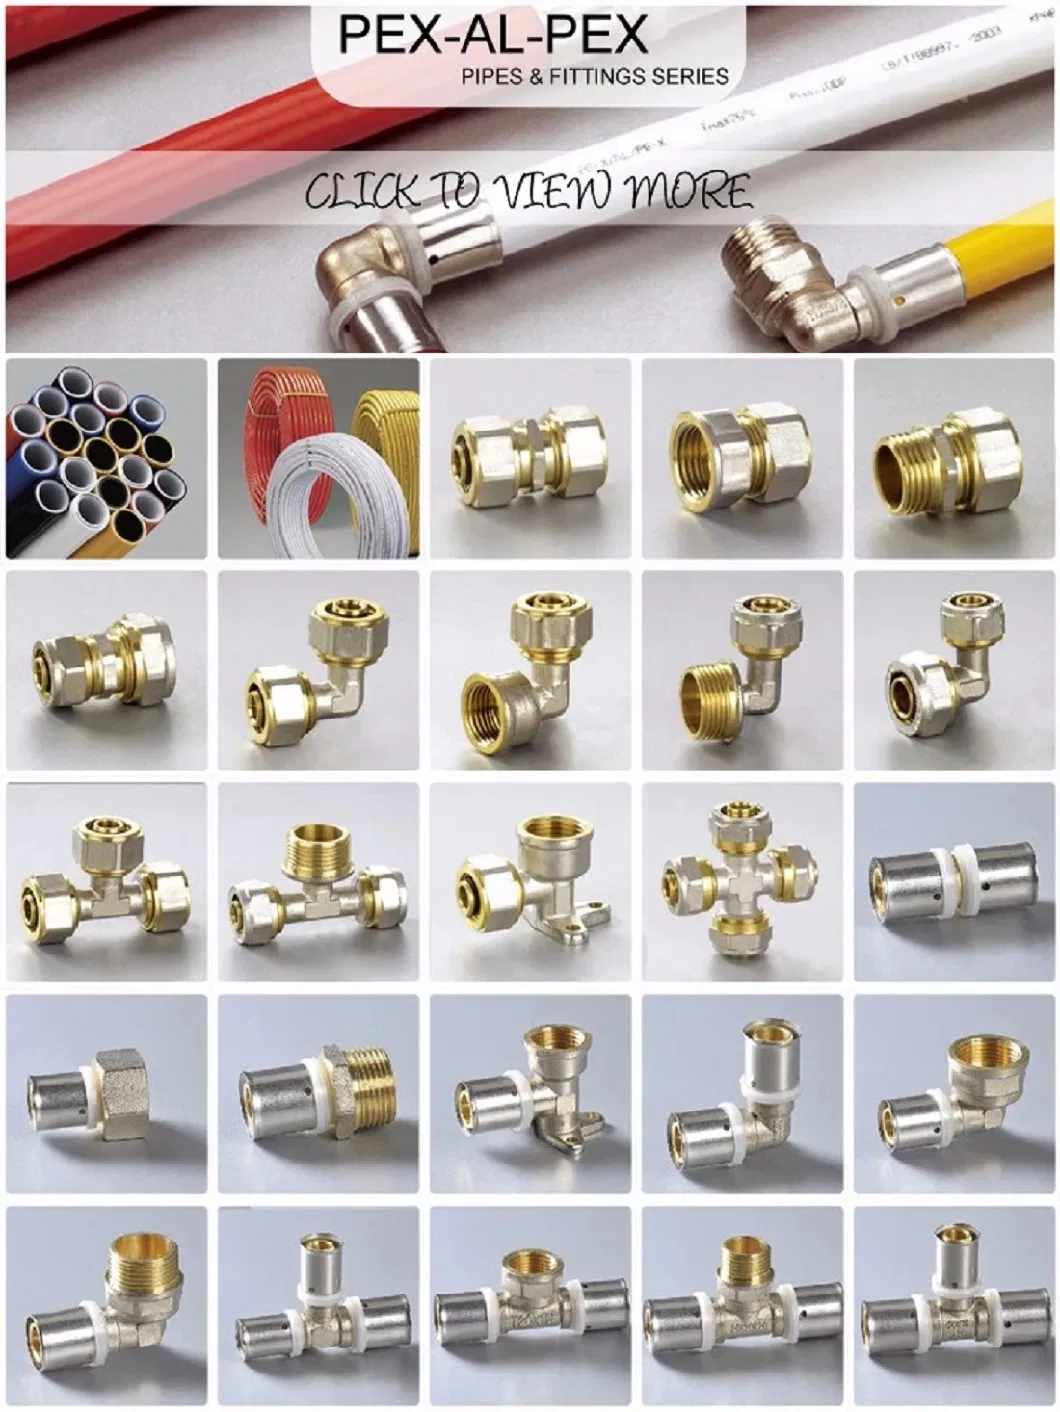 Equal Elbow Compression Brass Fittings for Pex-Al-Pex Multilayer/Composite Pipes